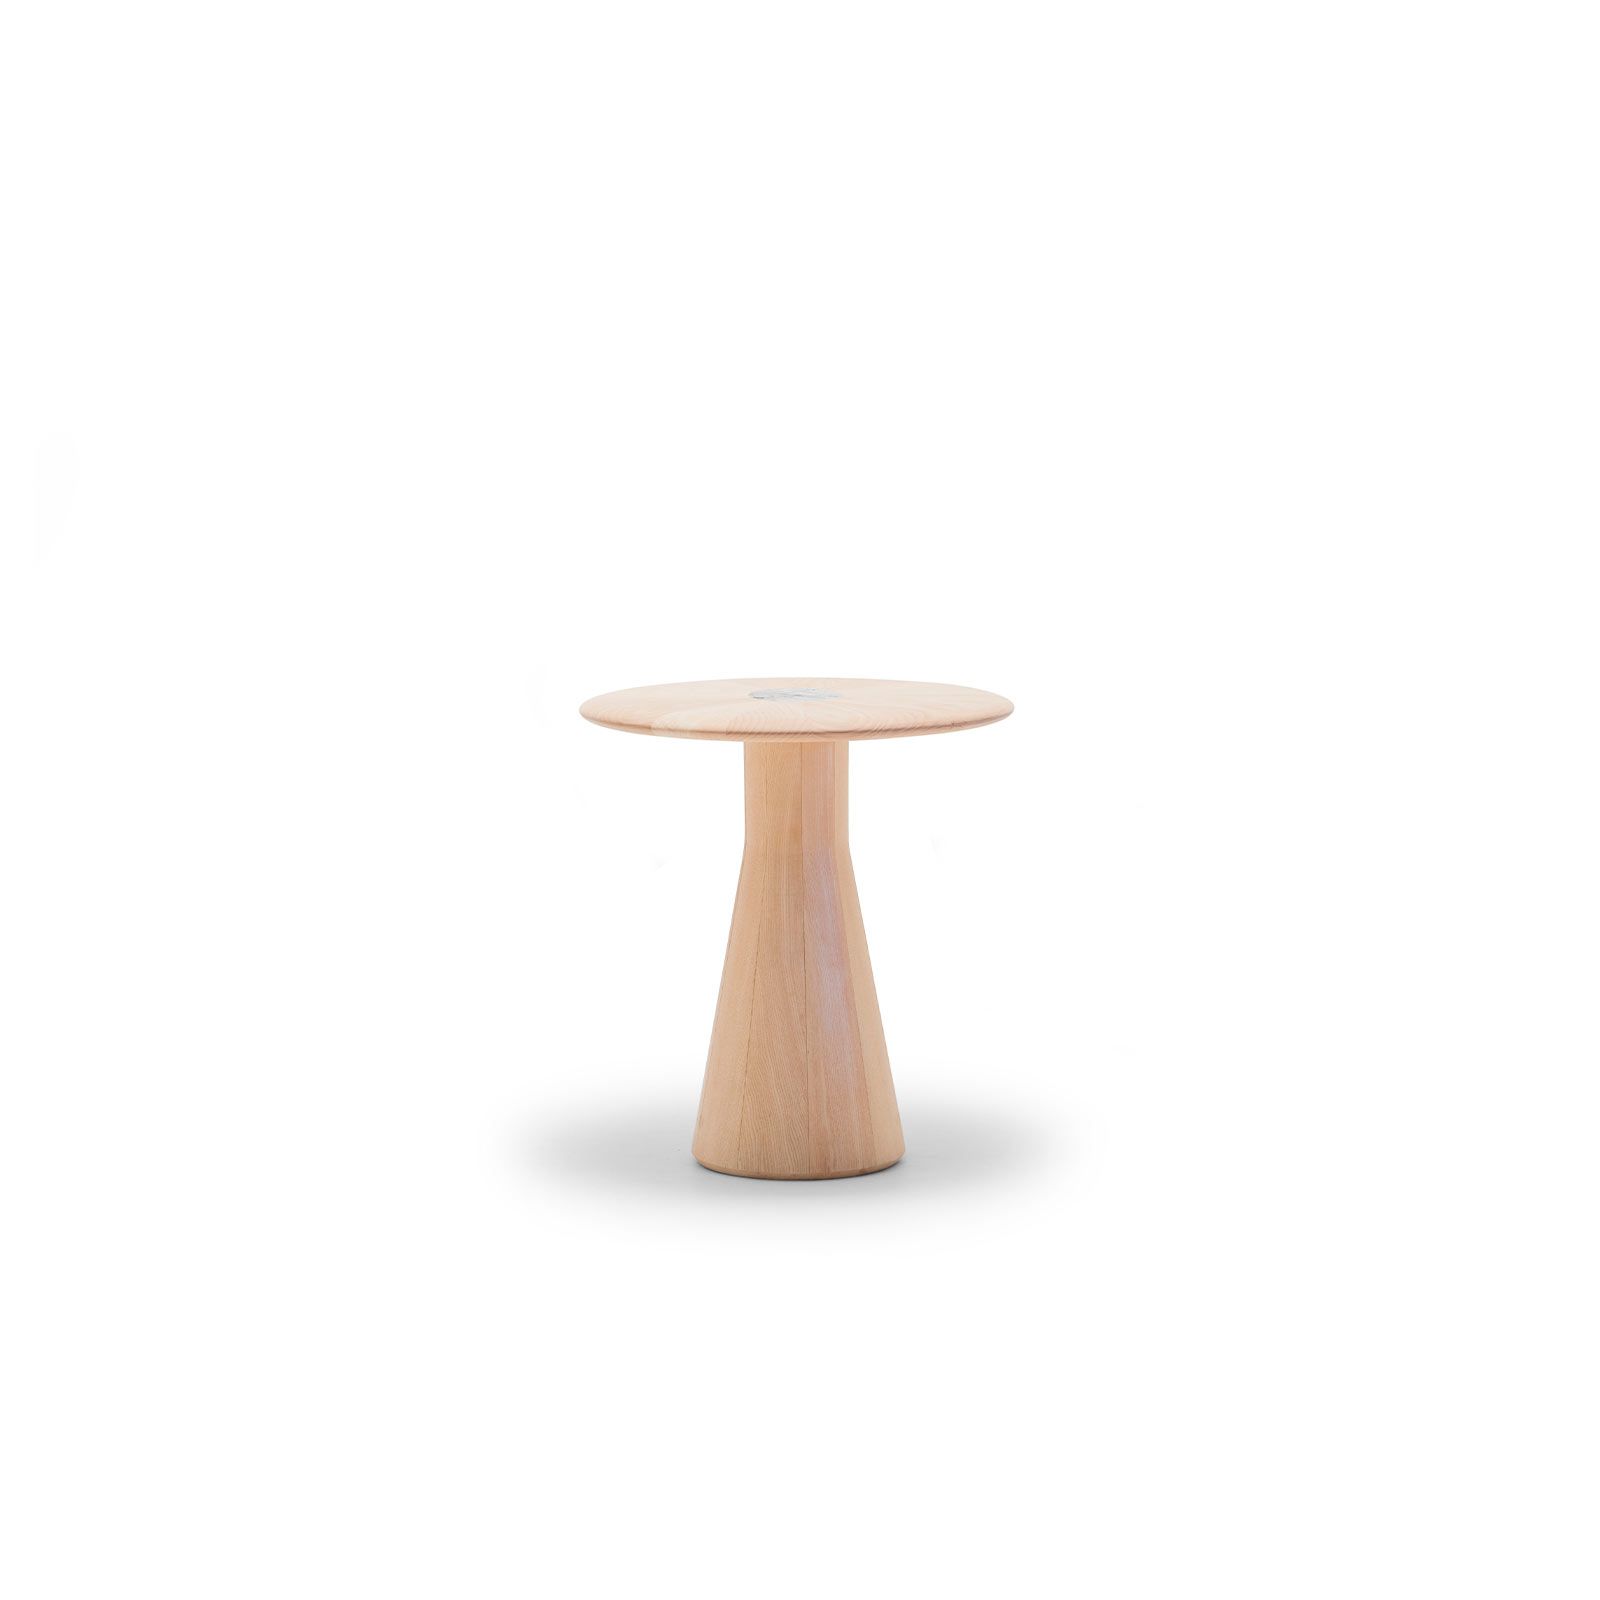 REVERSE WOOD OCCASIONAL TABLE